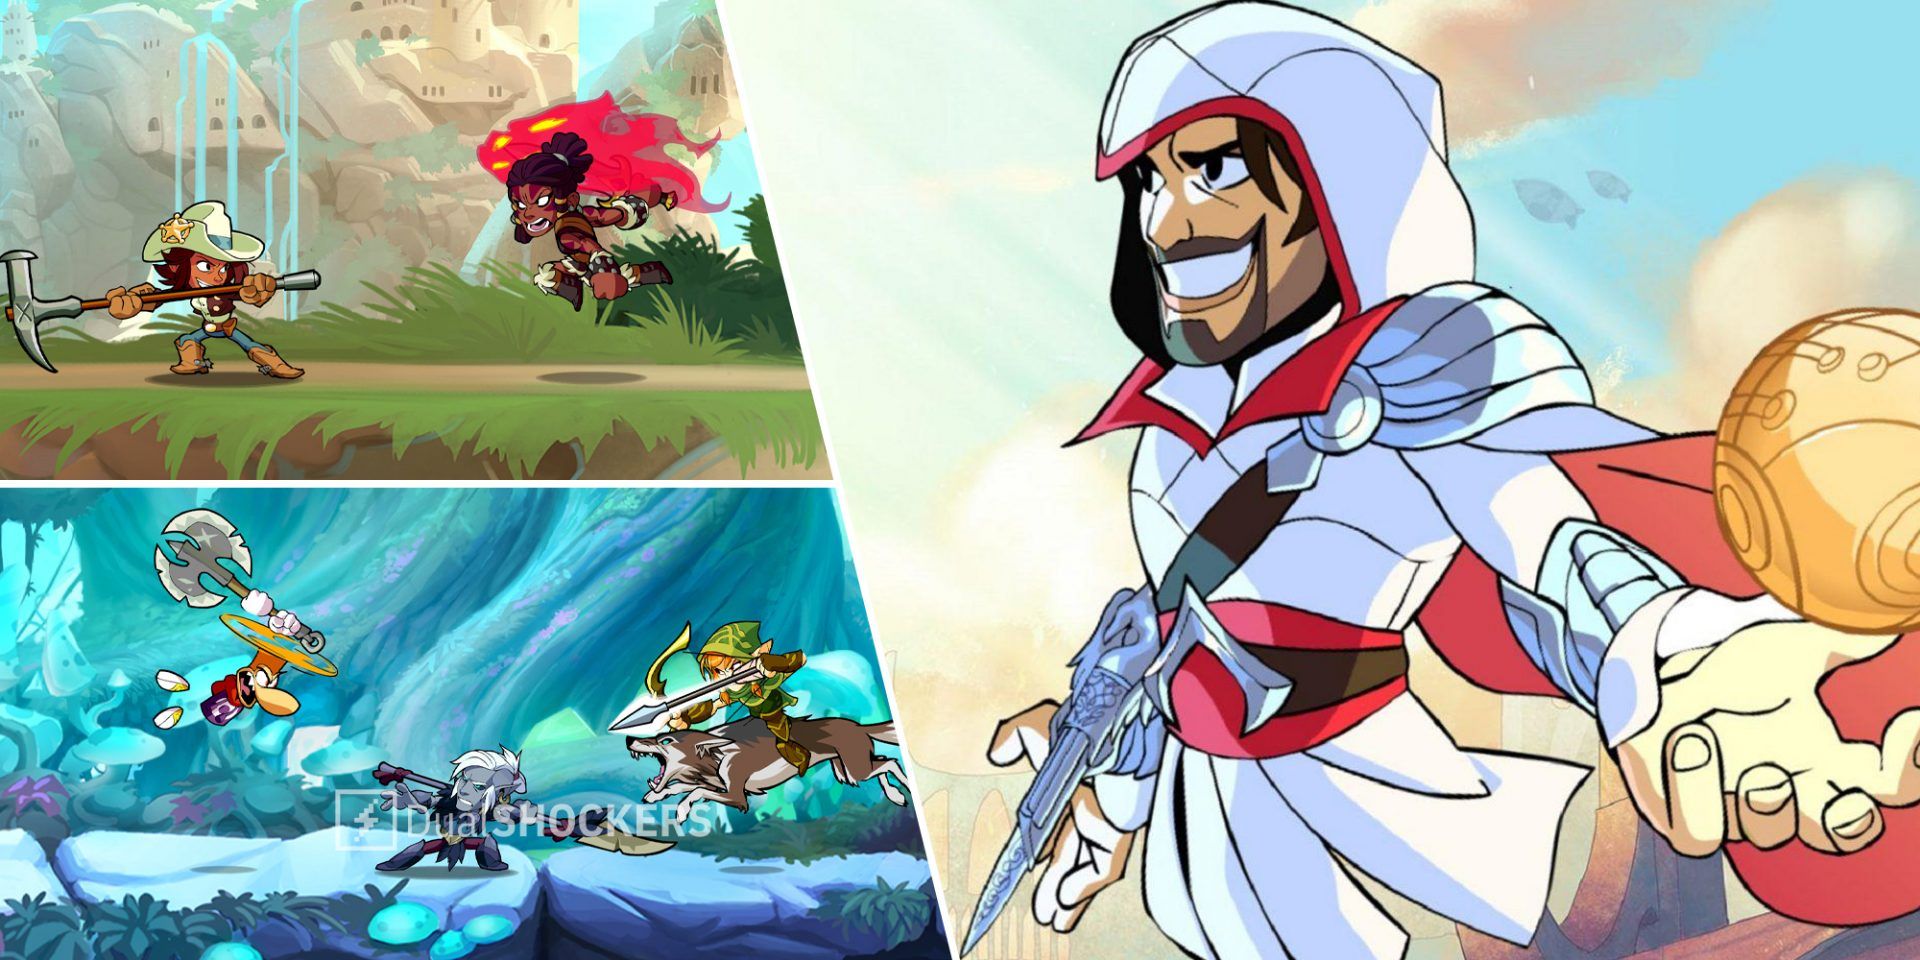 Brawlhalla characters fighting on left top and bottom, Ezio from Assassin's Creed on right